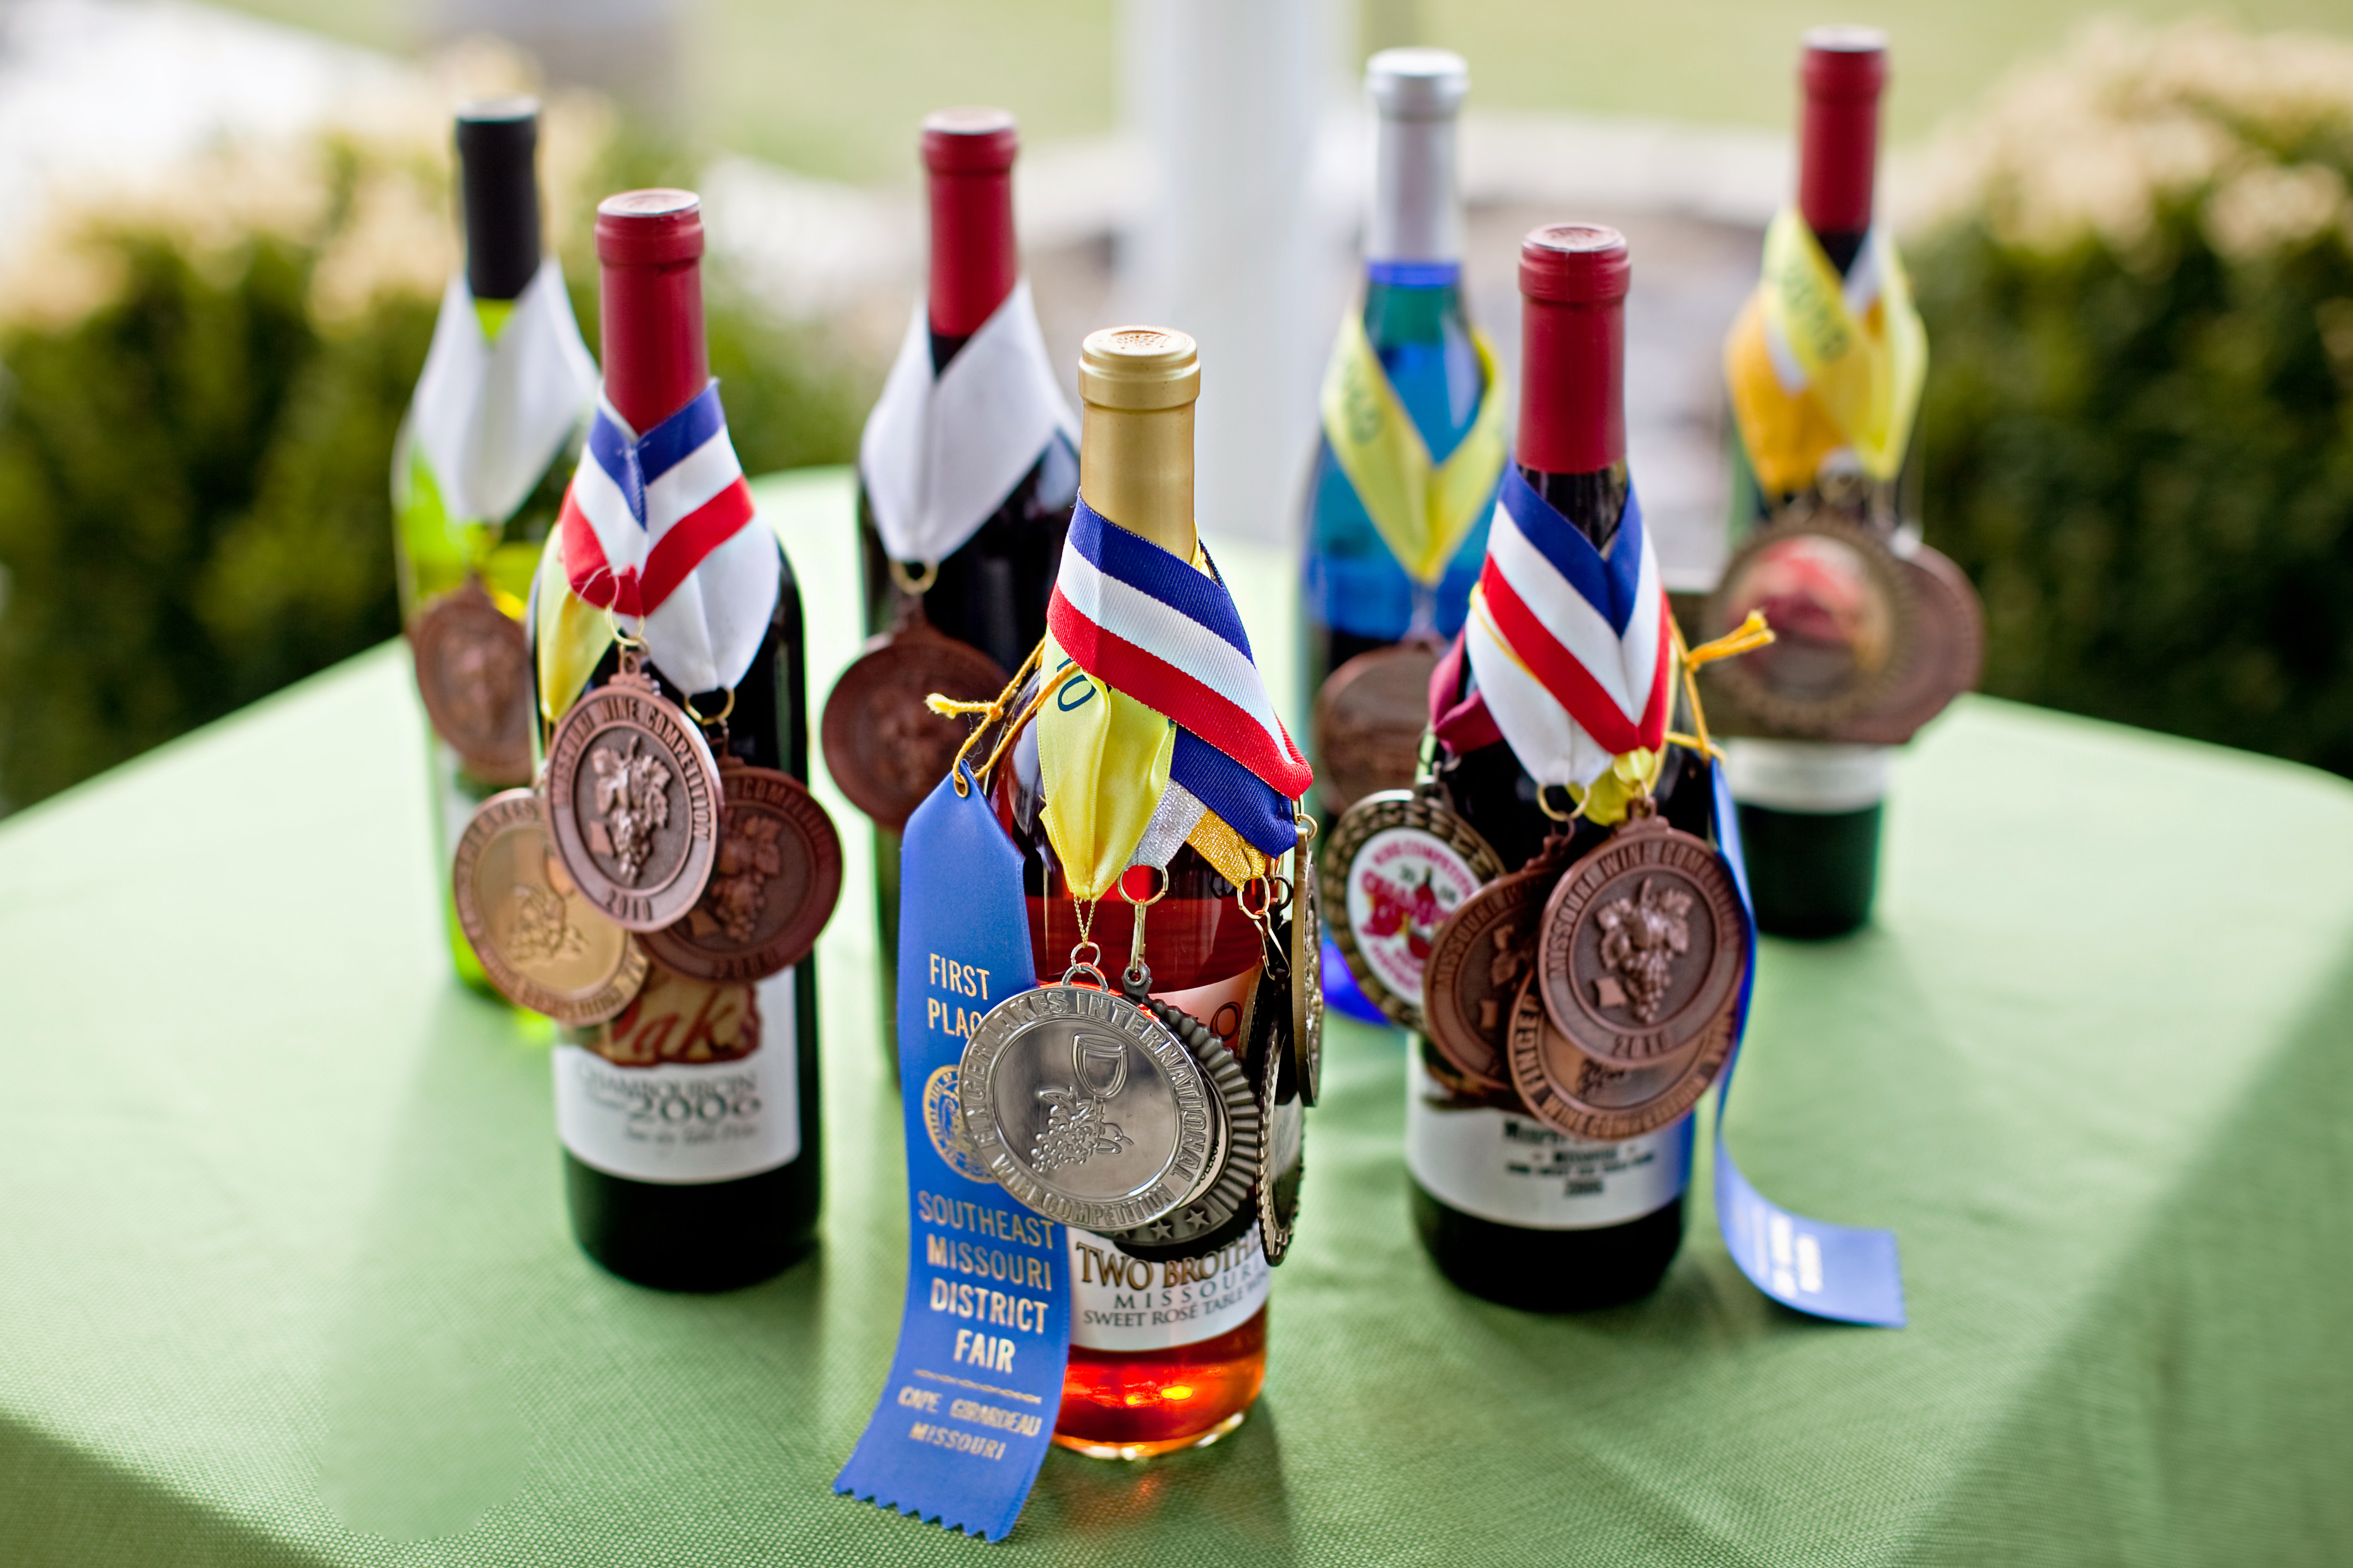 Twin Oaks Vineyard and Winery - outdoor photo, daytime, of several wine bottles arranged on a table with various medals.